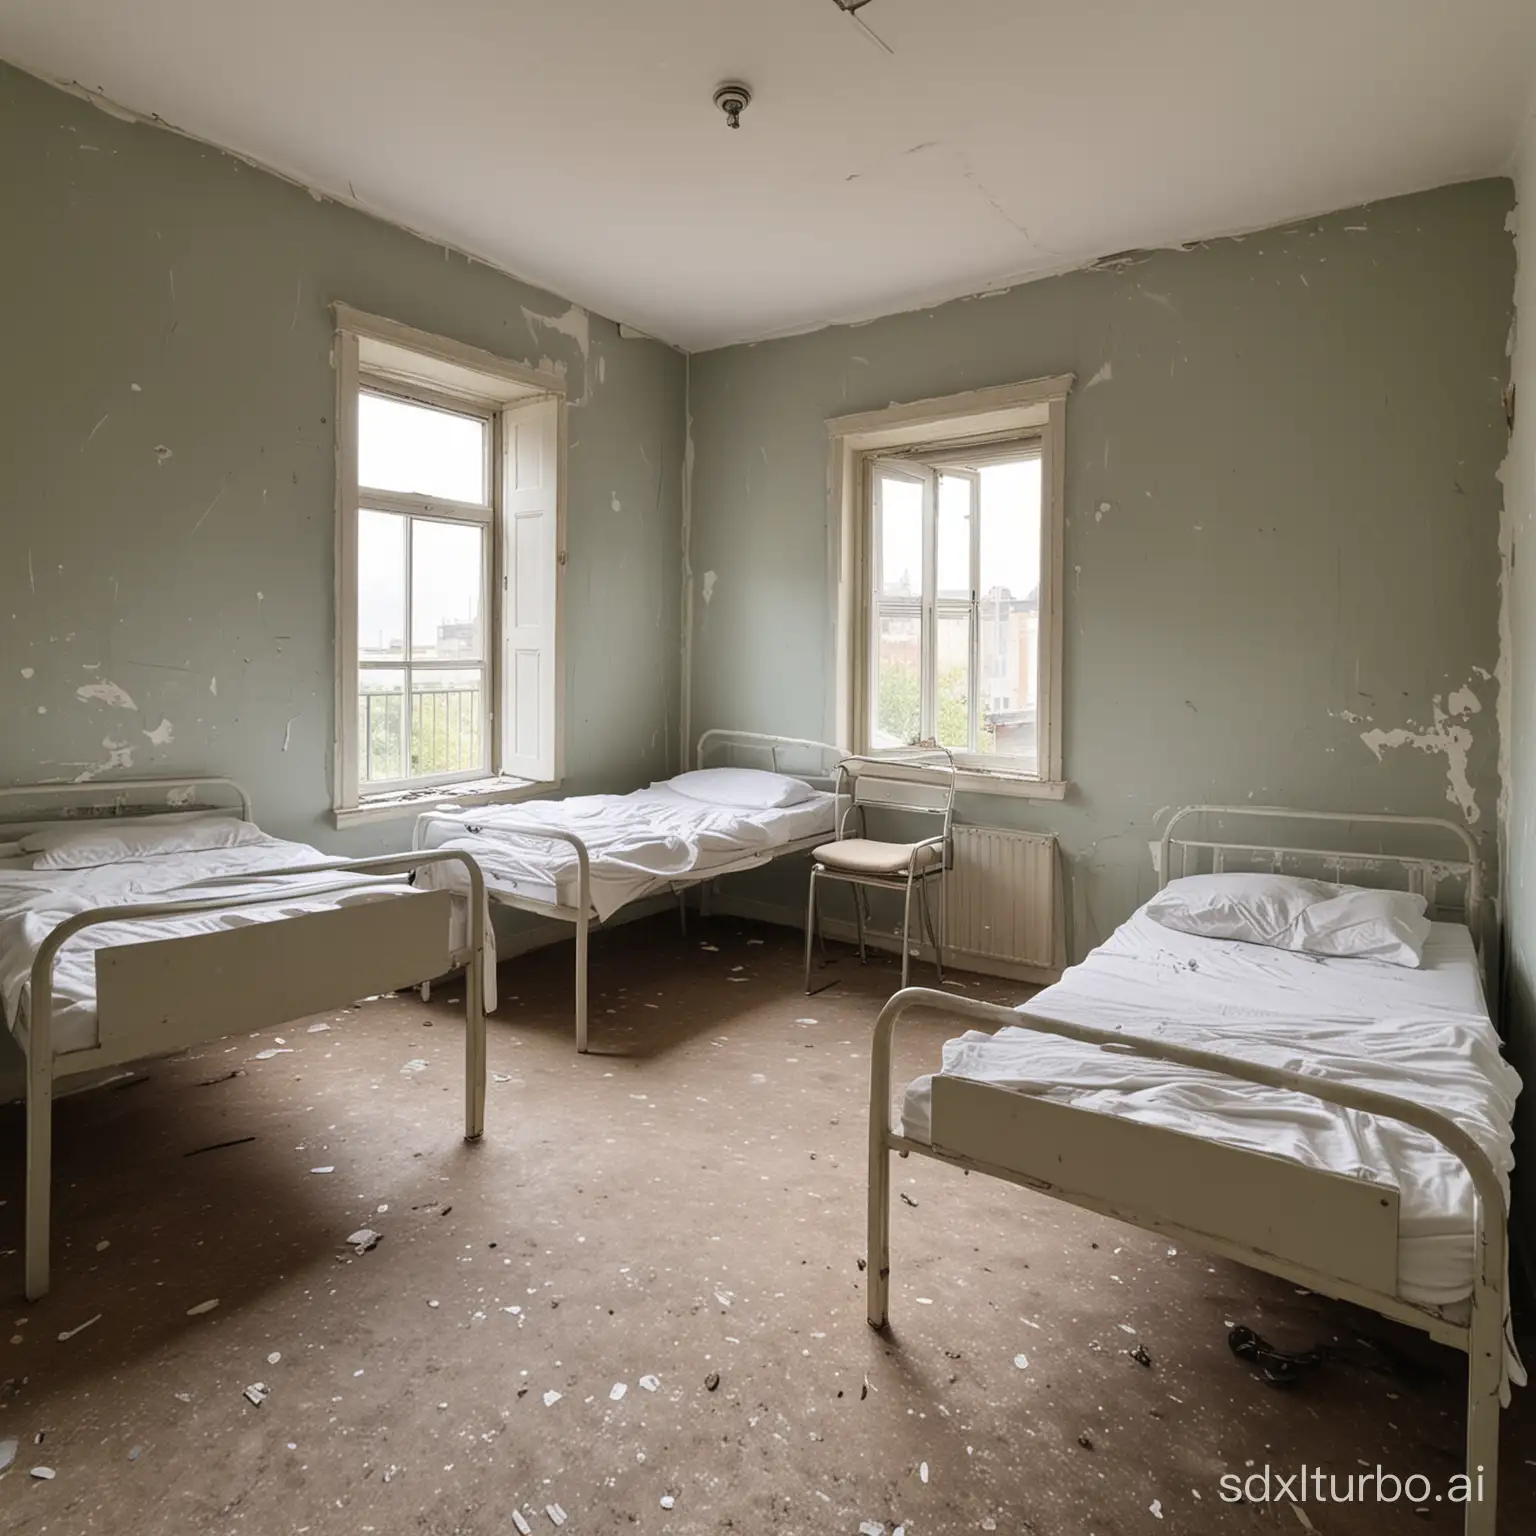 Reality: Four-person room, basic facilities, with simple beds, a shared desk, walls with some peeling paint